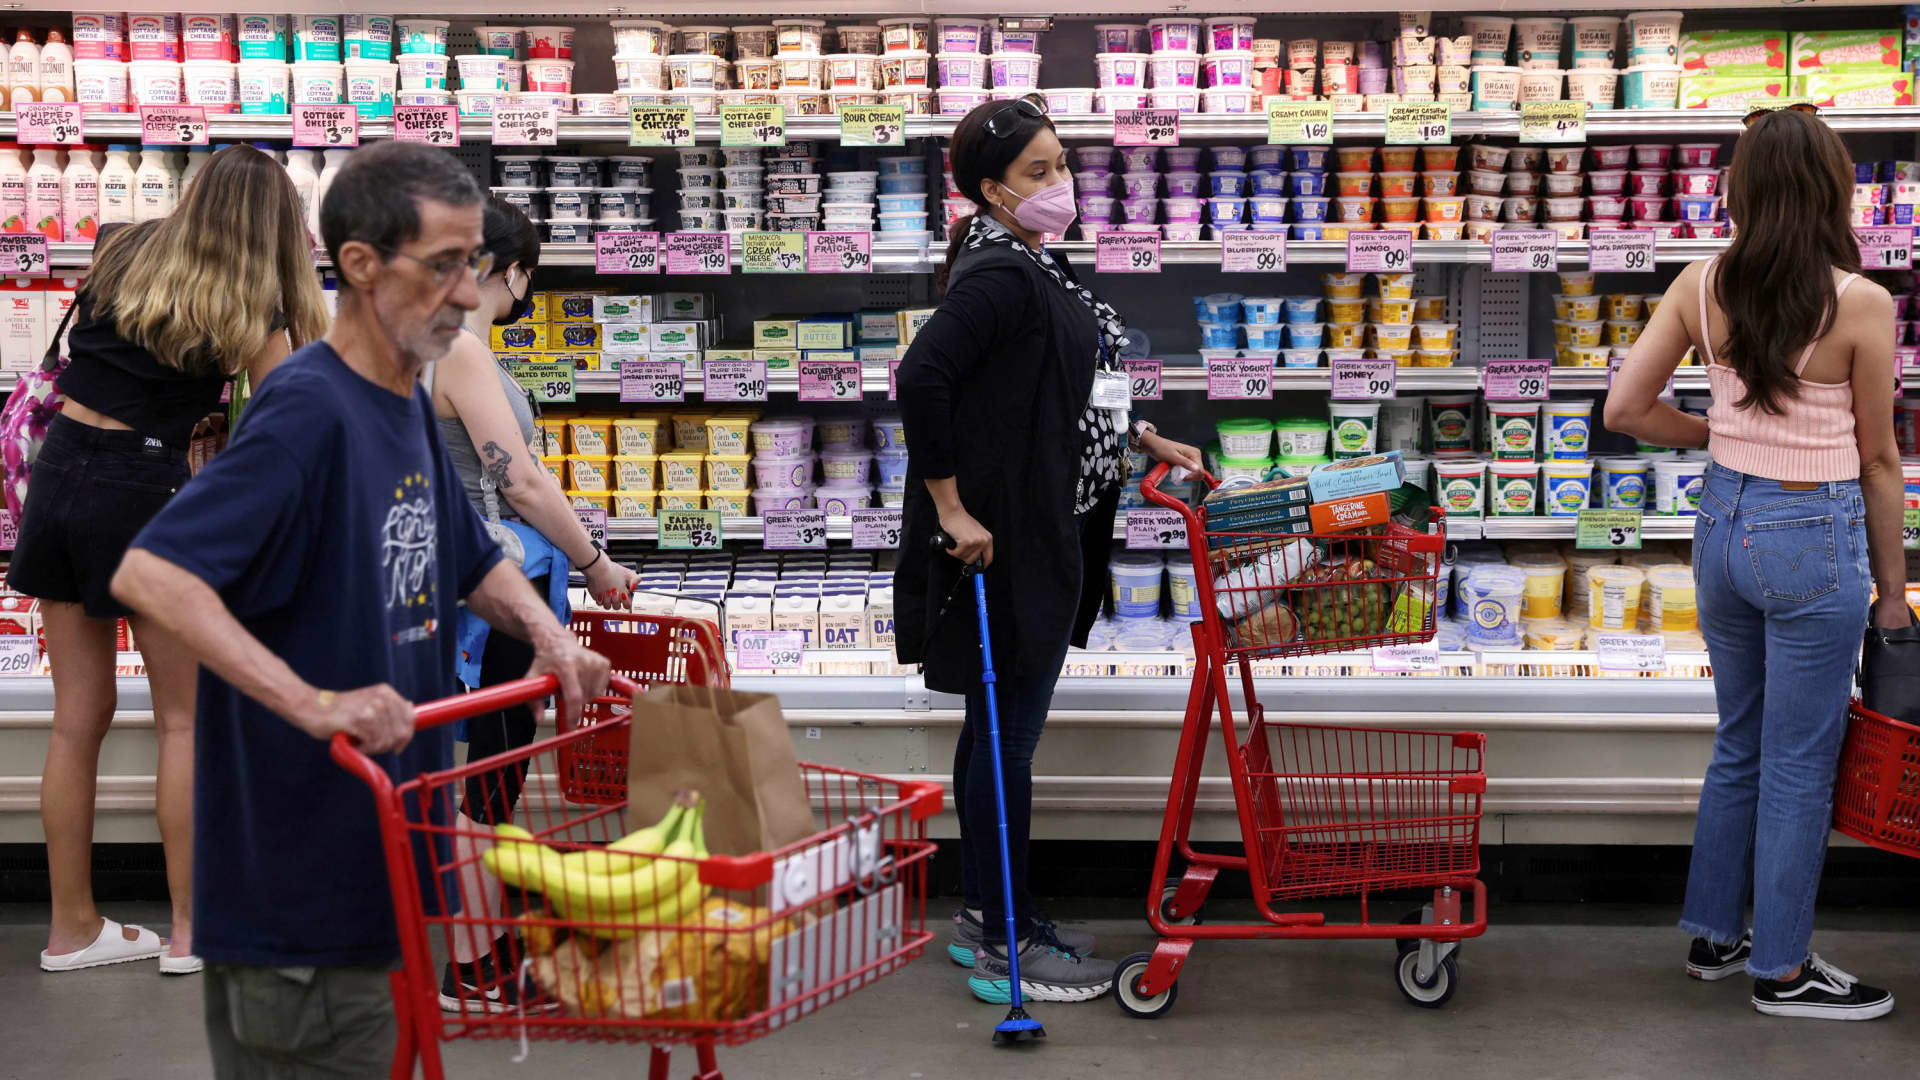 What we’ve learned about consumer health this earnings season